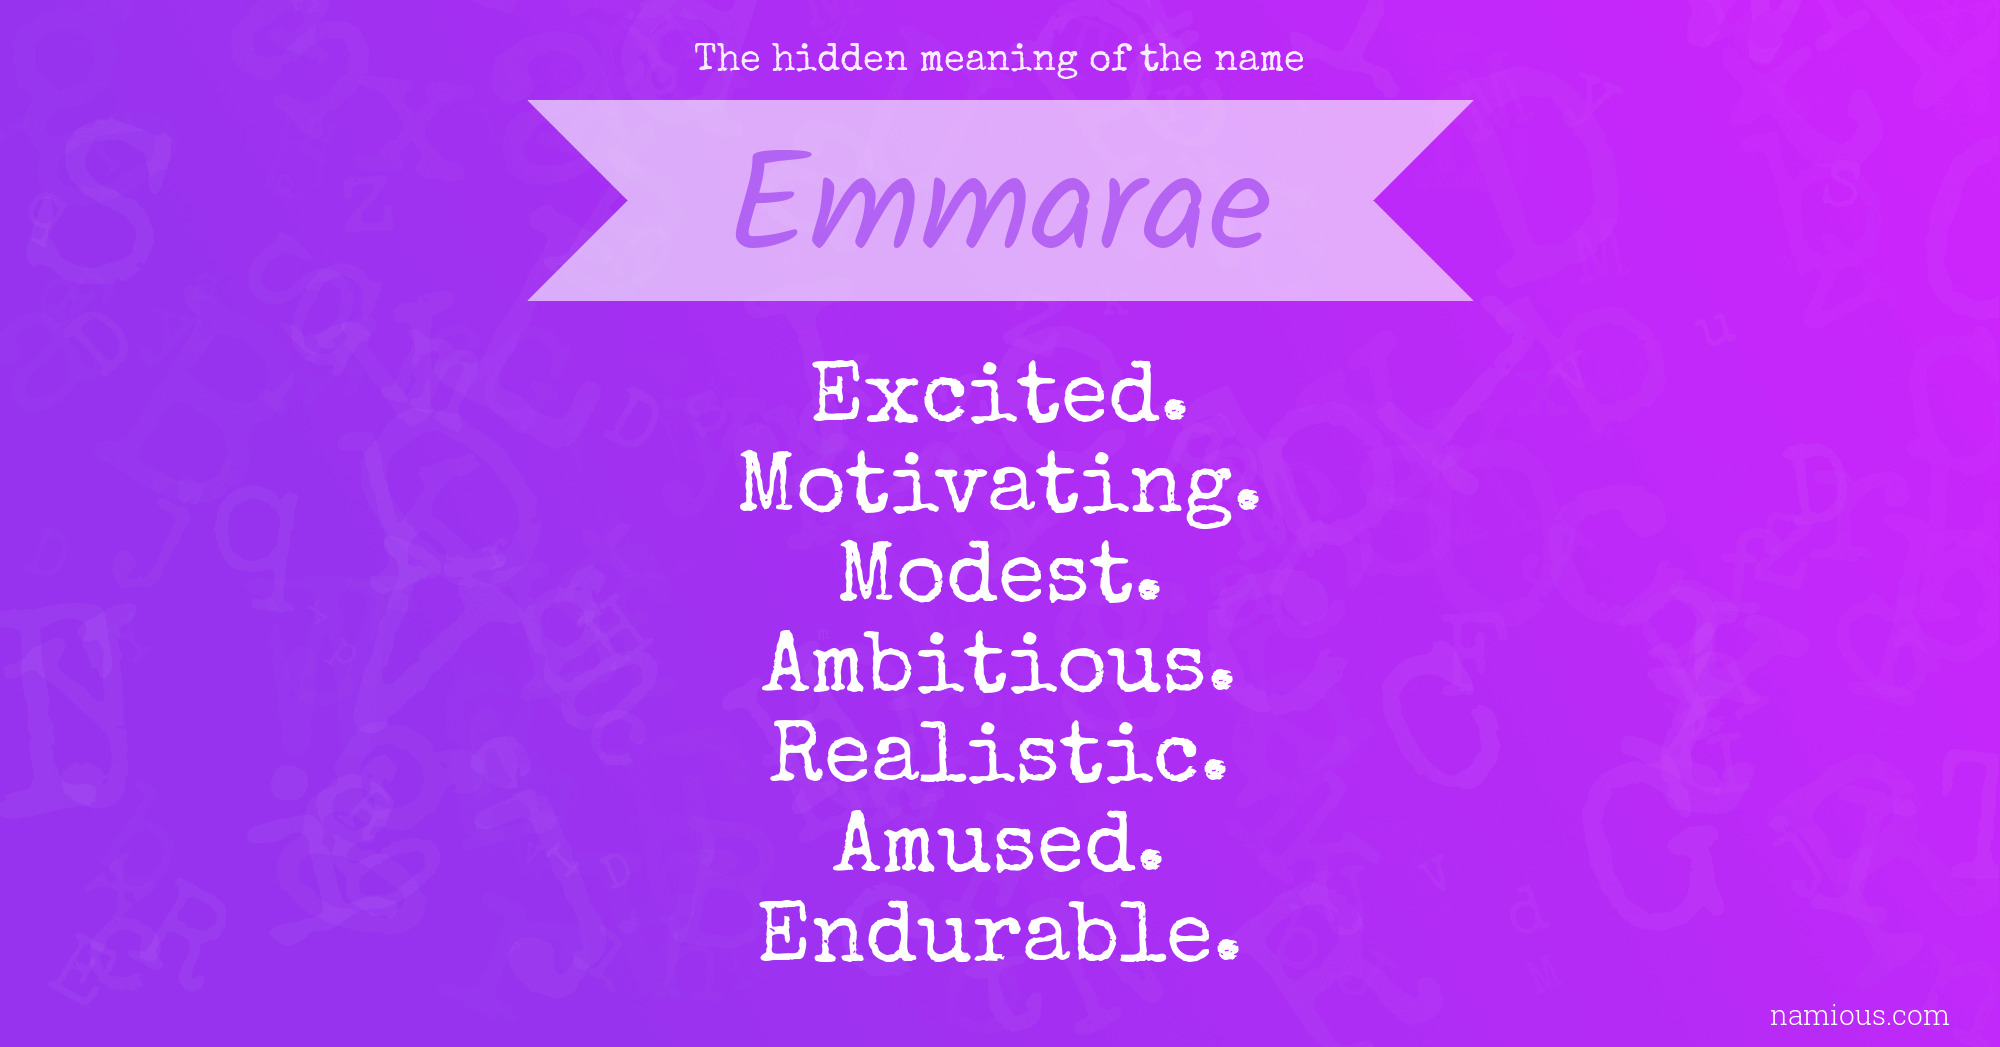 The hidden meaning of the name Emmarae